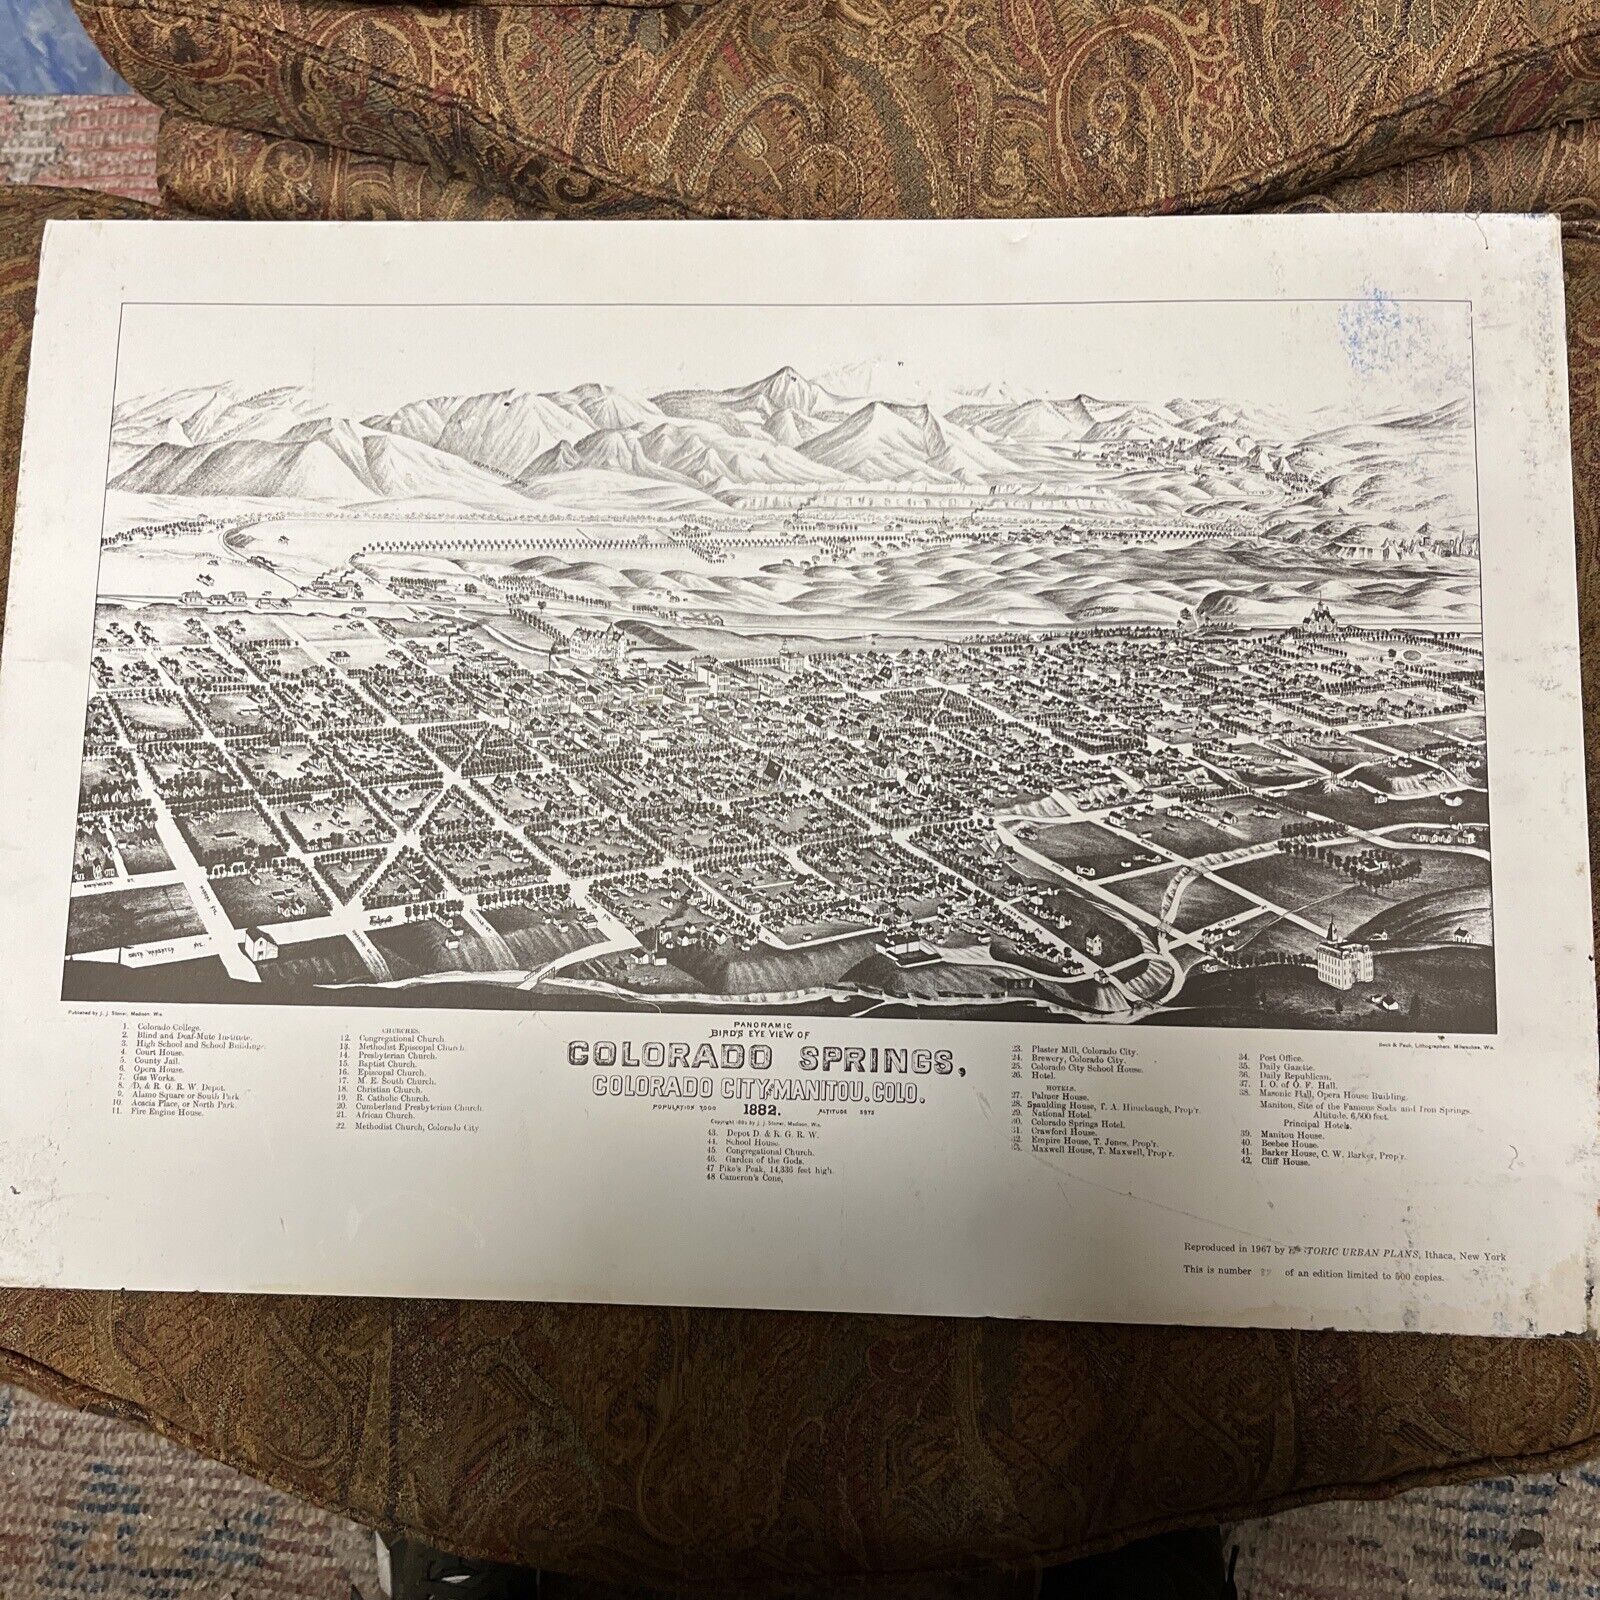 1967 Colorado Springs Limited Edition Print Number 87 /500